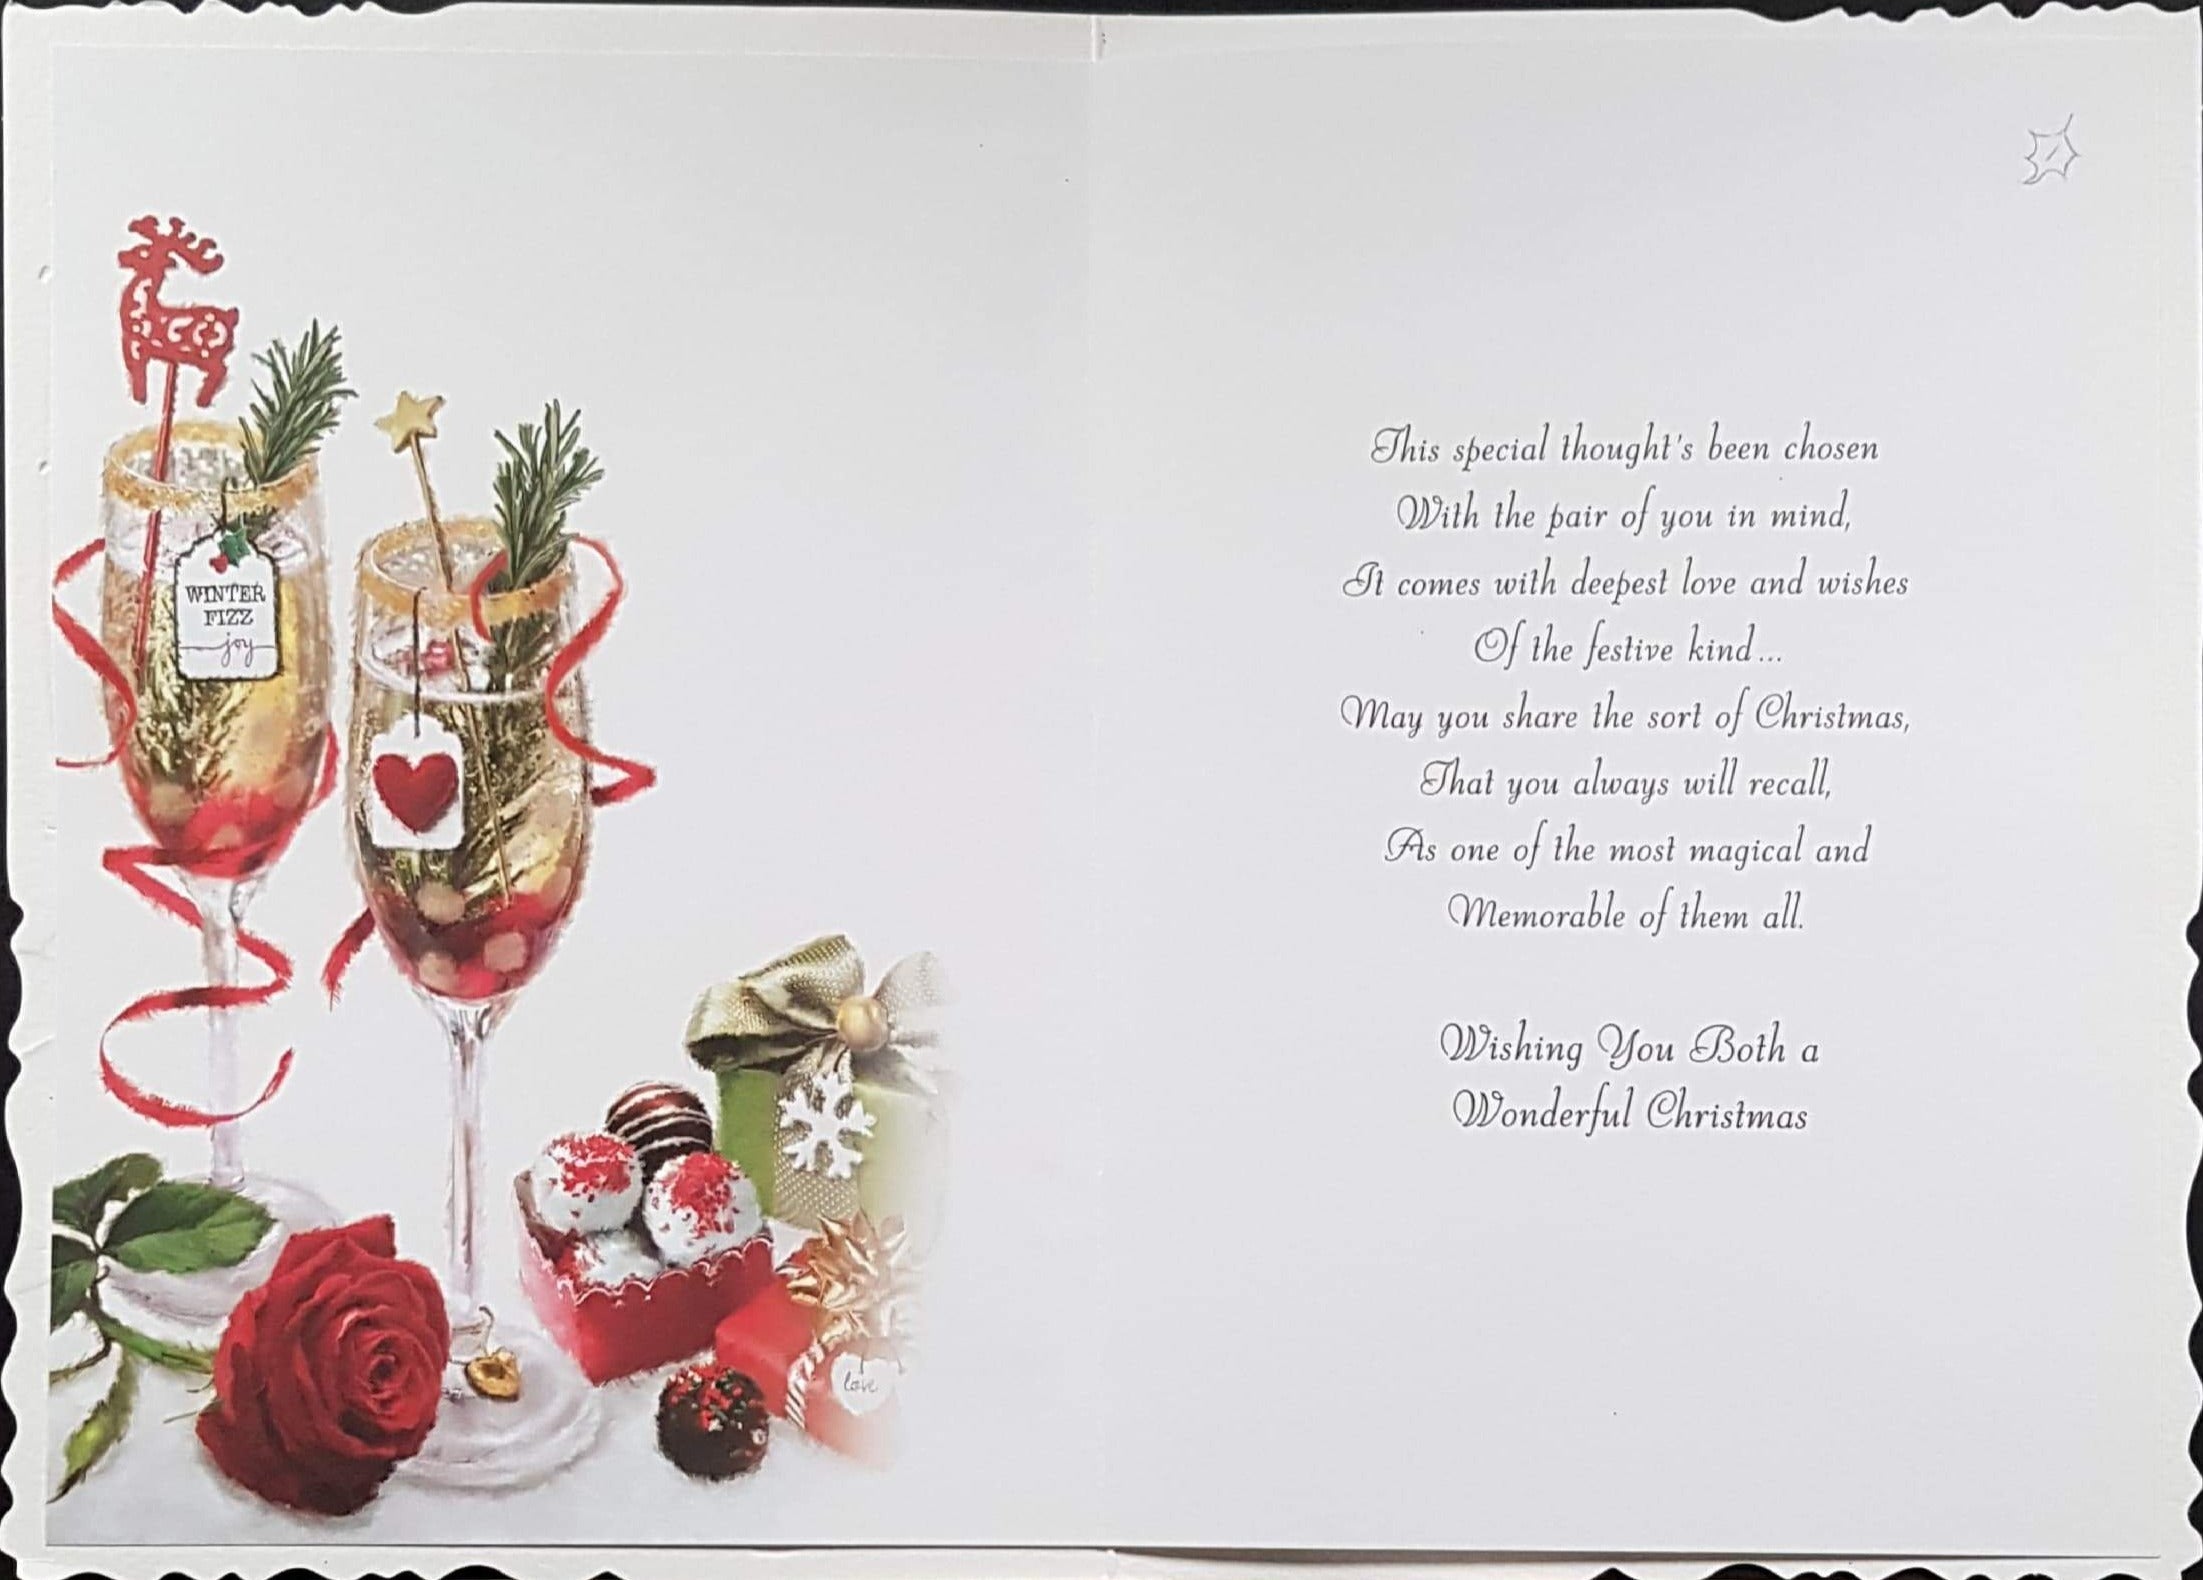 Daughter And Partner Christmas Card - At Christmas & Mulled Wine, Rose & Wrapped Gifts